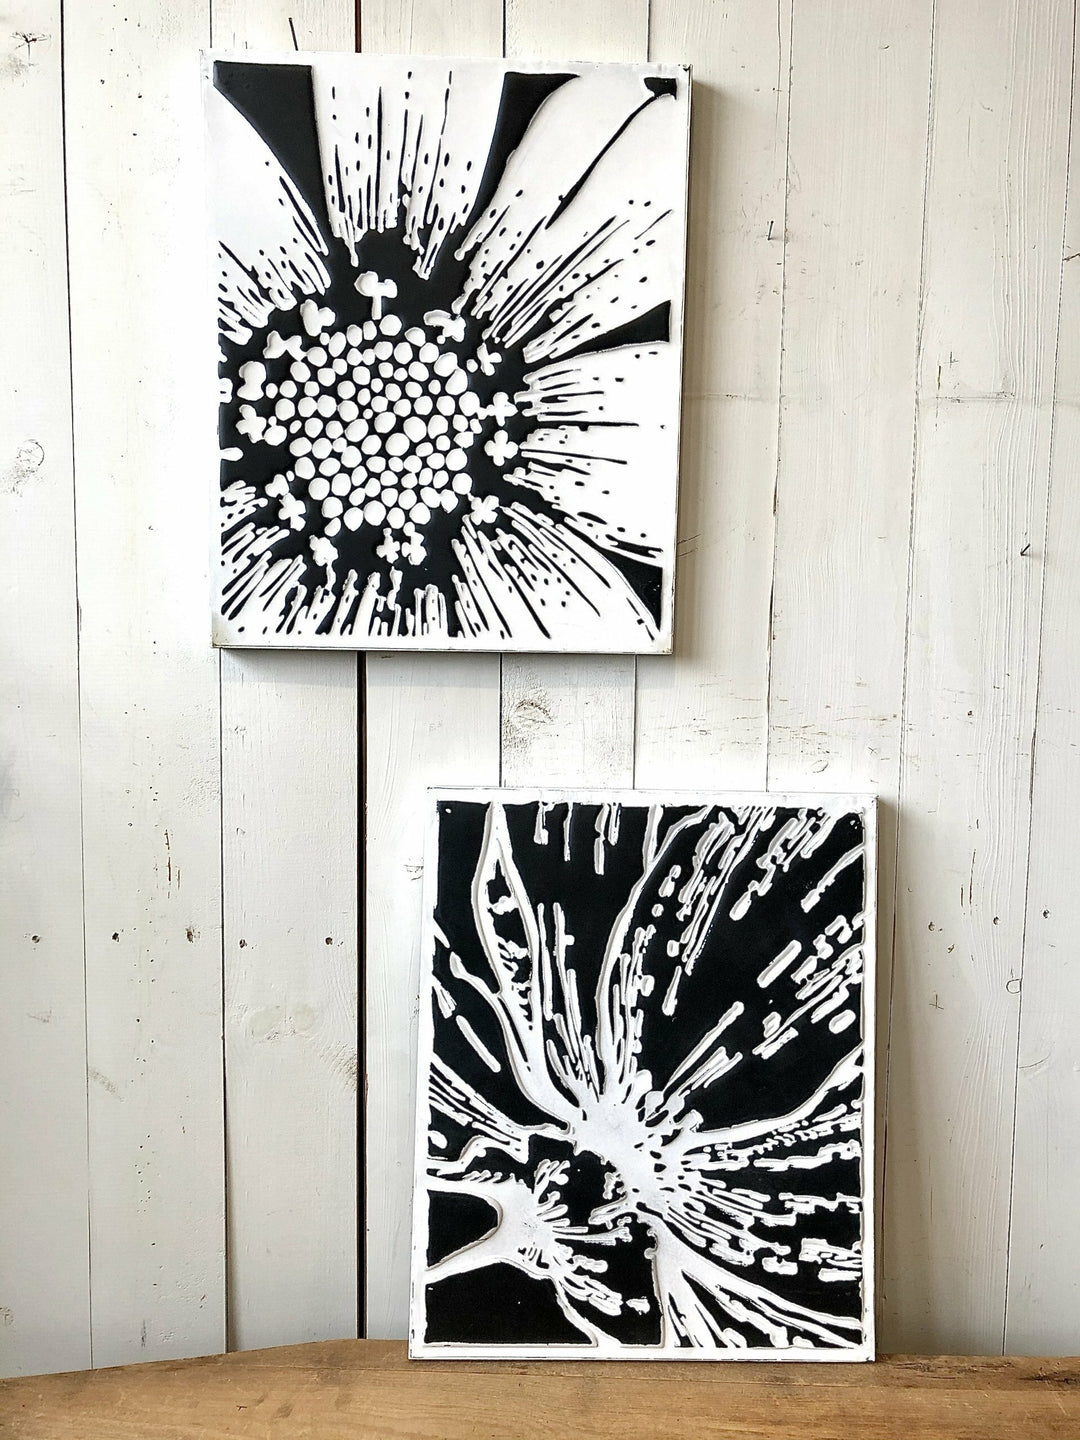 Embossed Black and White Metal Floral Wall Art - 4 Variations